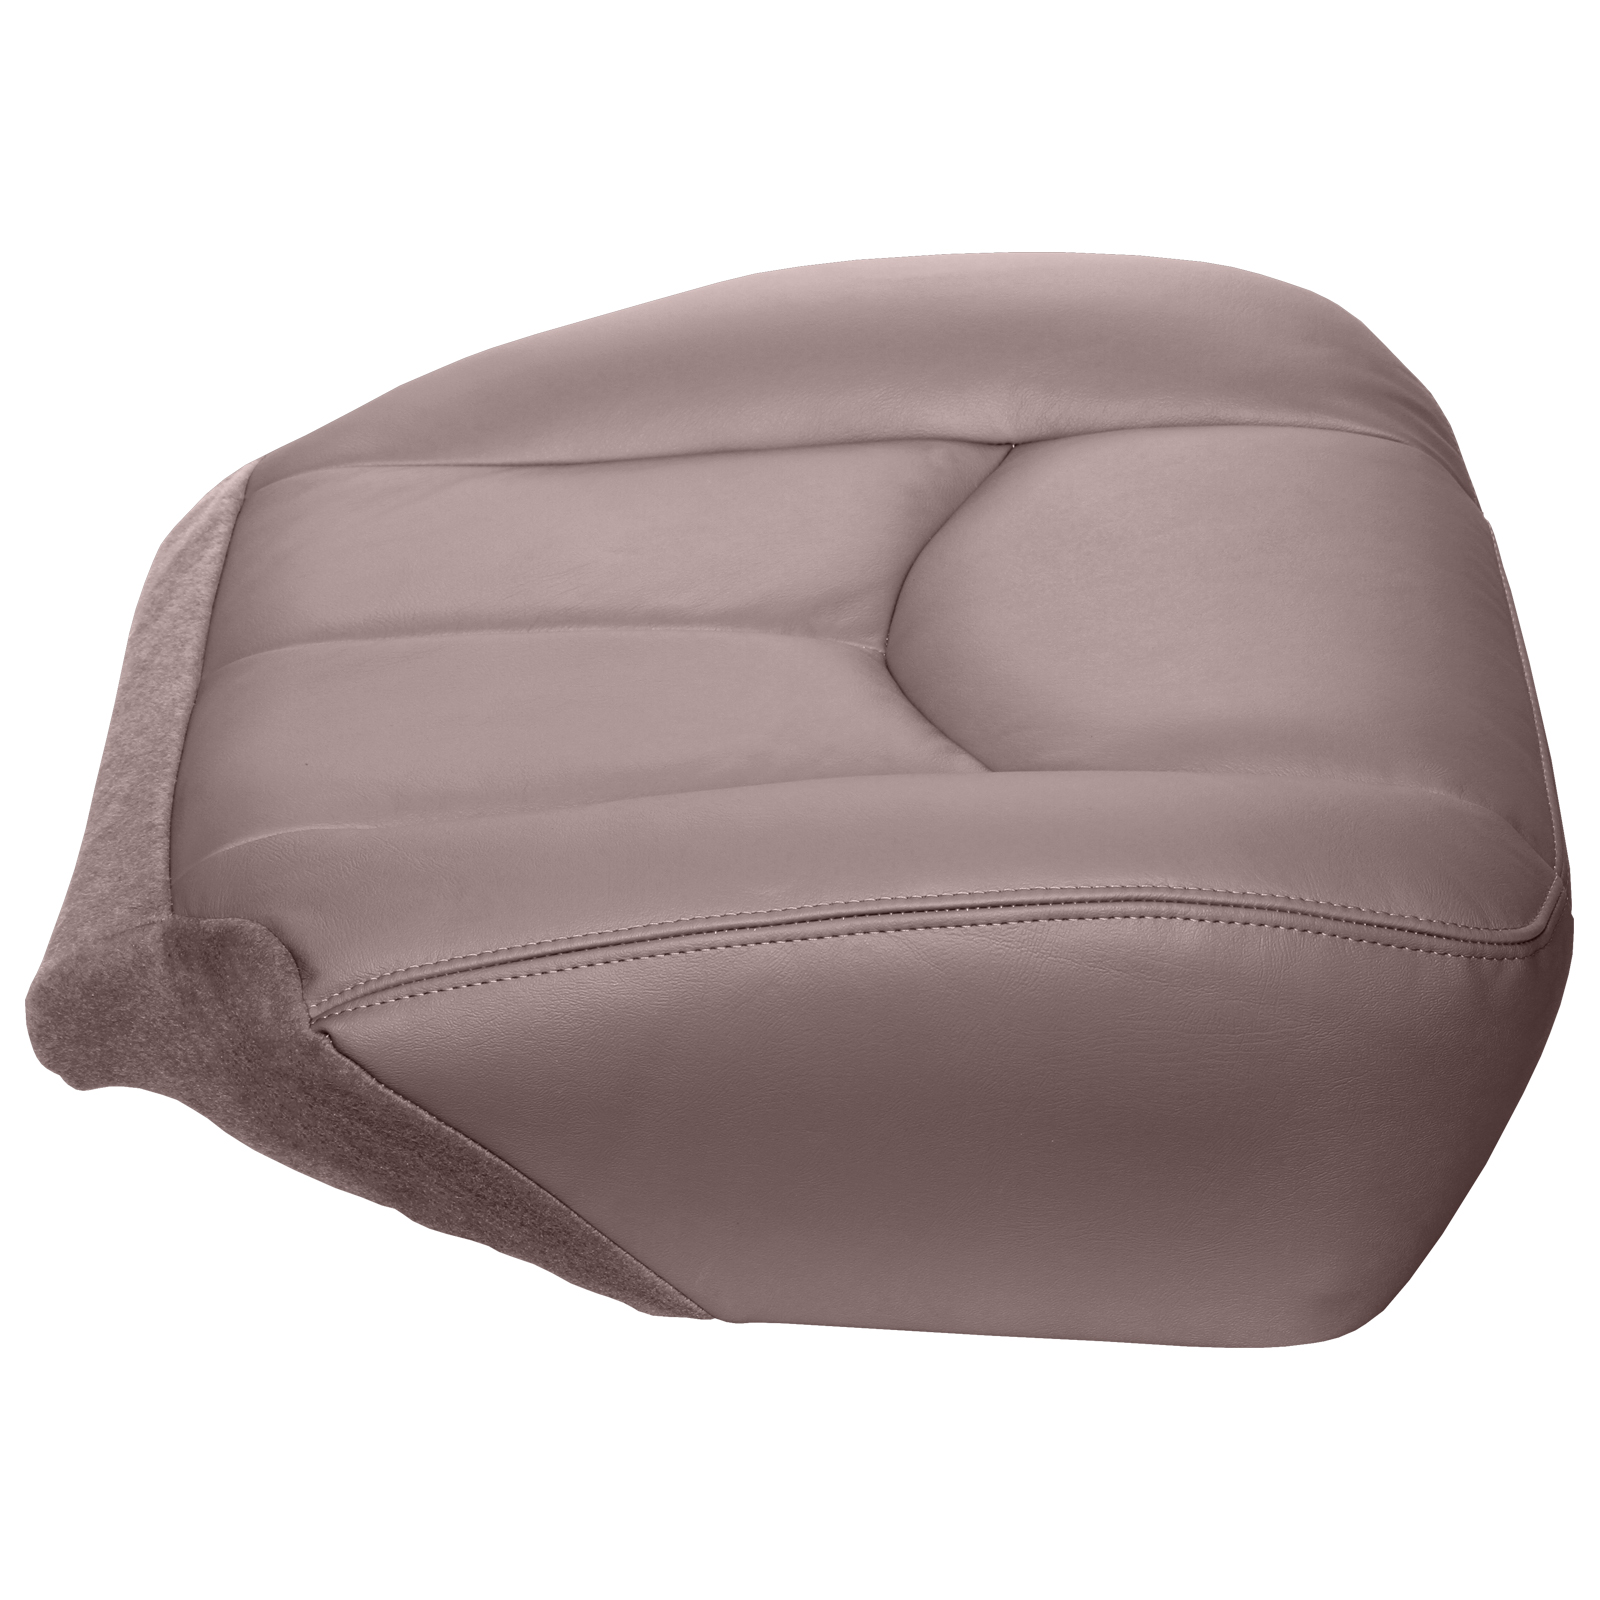 The Seat Shop Silverado Passenger Bottom OEM Fit Leather Seat Cover, Tan - image 2 of 2